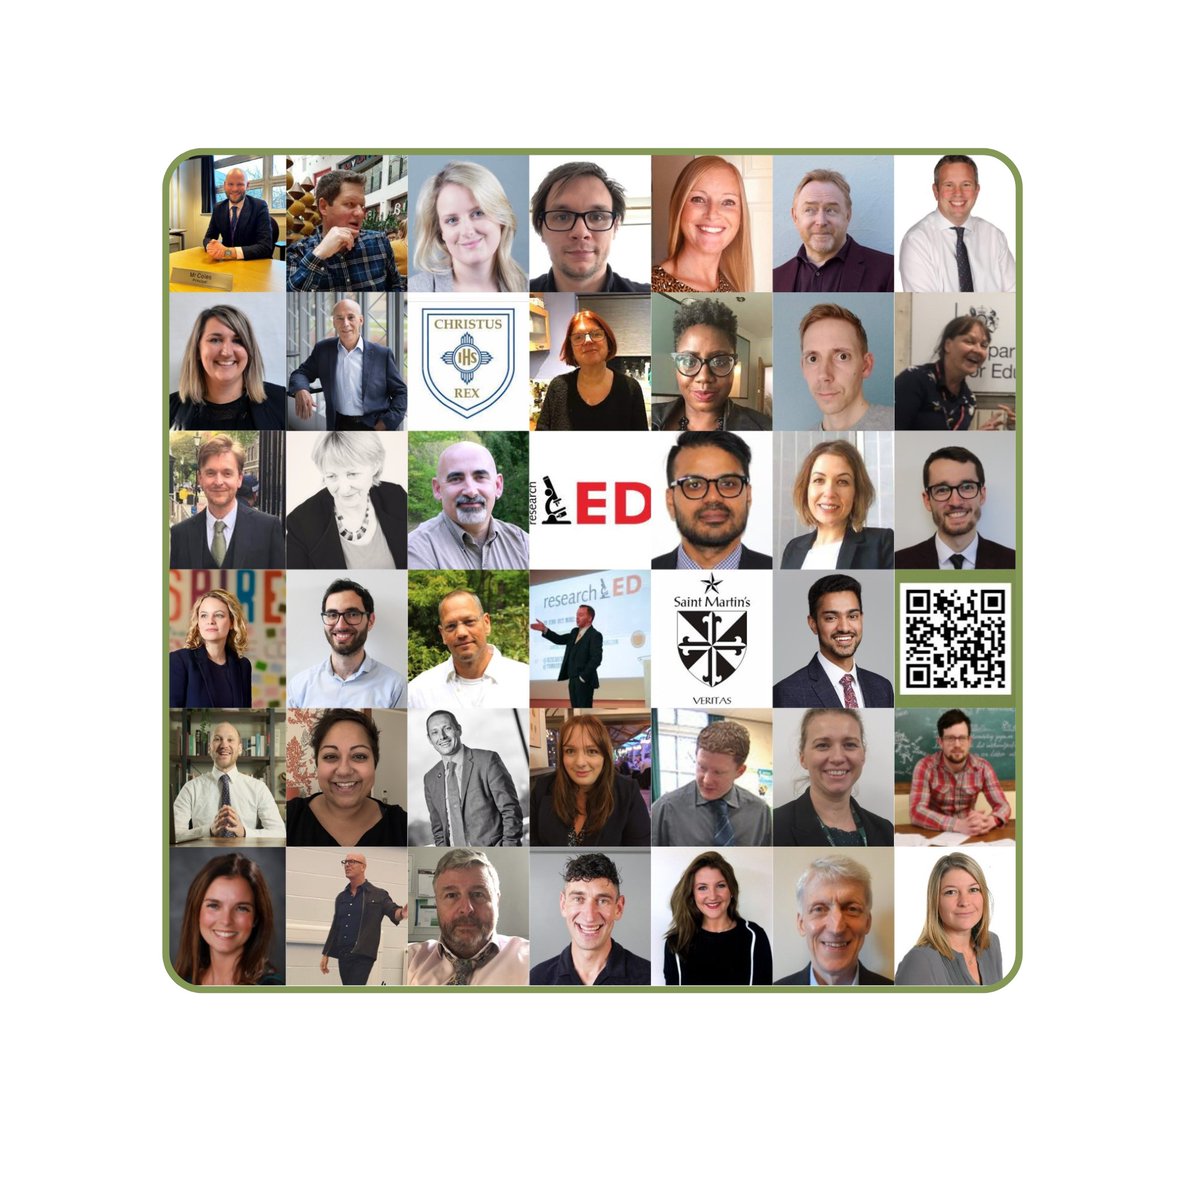 A chocolate box of expert speakers for ELP Year 5: @jon_hutchinson_ @BarryNSmith79 @primarypercival @Ruth_Ashbee @adamboxer1 and welcoming @Suchmo83. Enrolment open; early enrolment discount. Click below to learn more: exemplaryleadership.org.uk